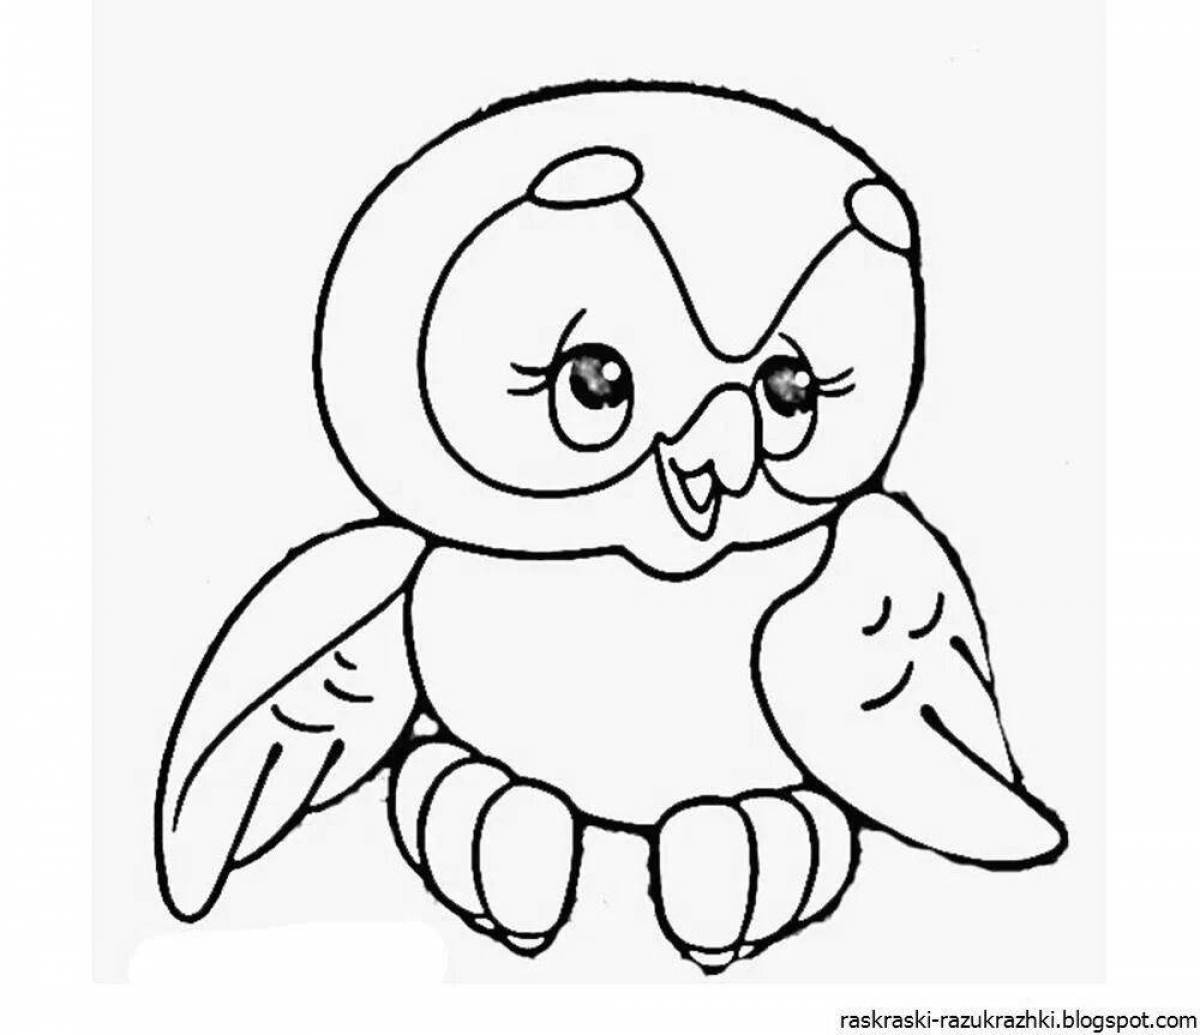 Adorable owl coloring page for kids